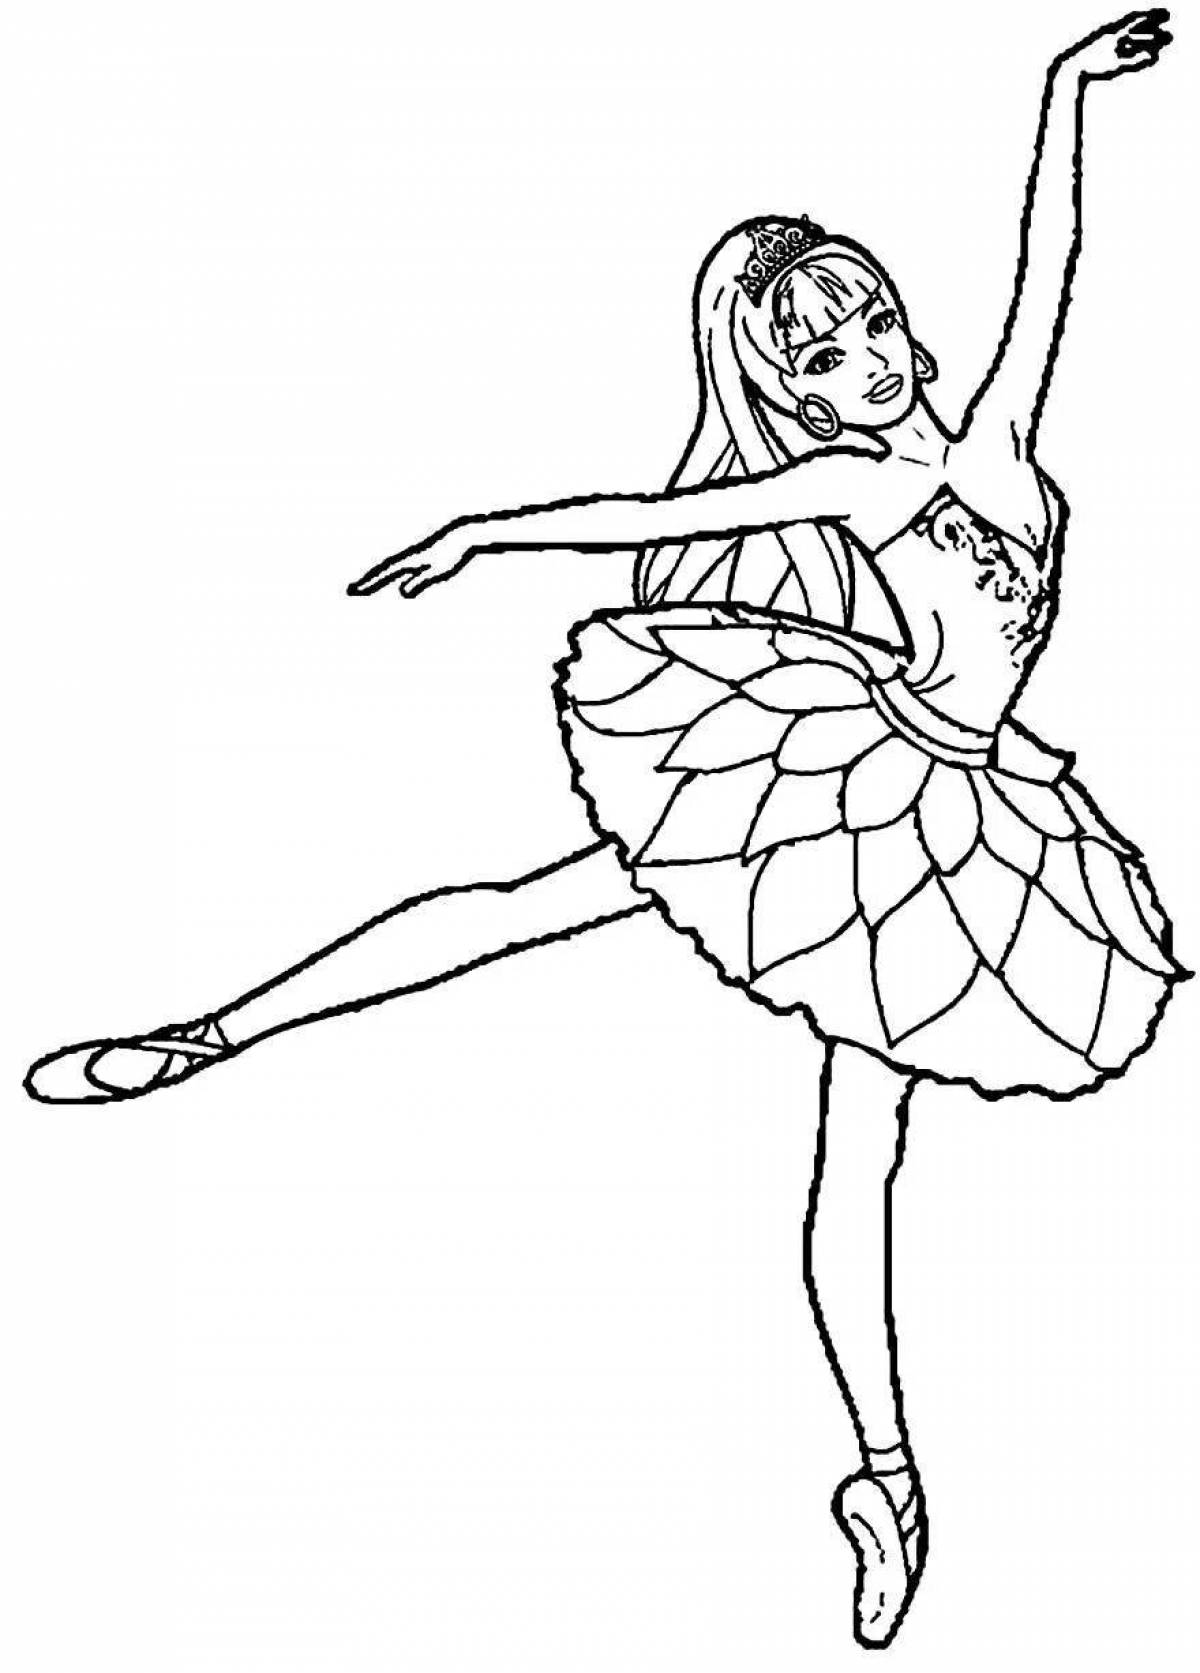 Colorful barbie gymnast coloring page